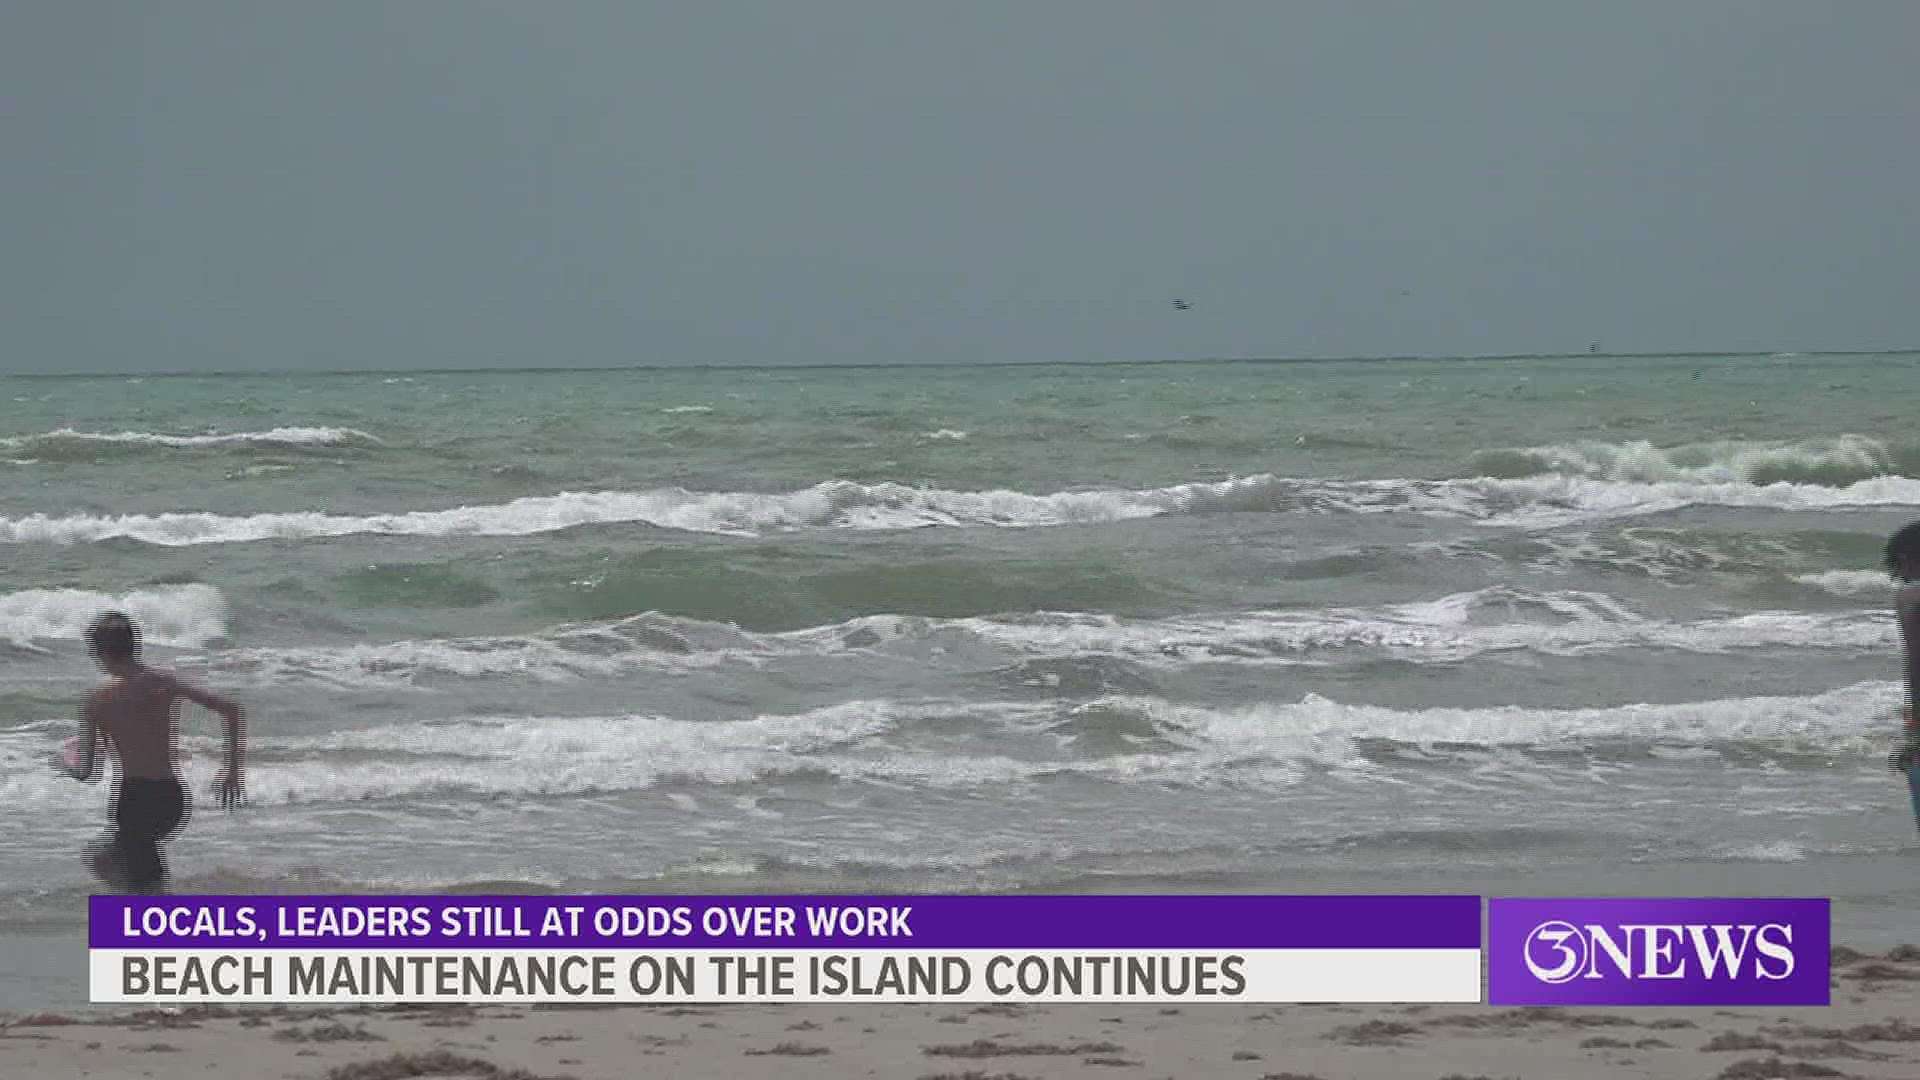 Videos on social media show large machinery scraping drive lanes on Port Aransas beaches, causing some to believe the maintenance is going too far.